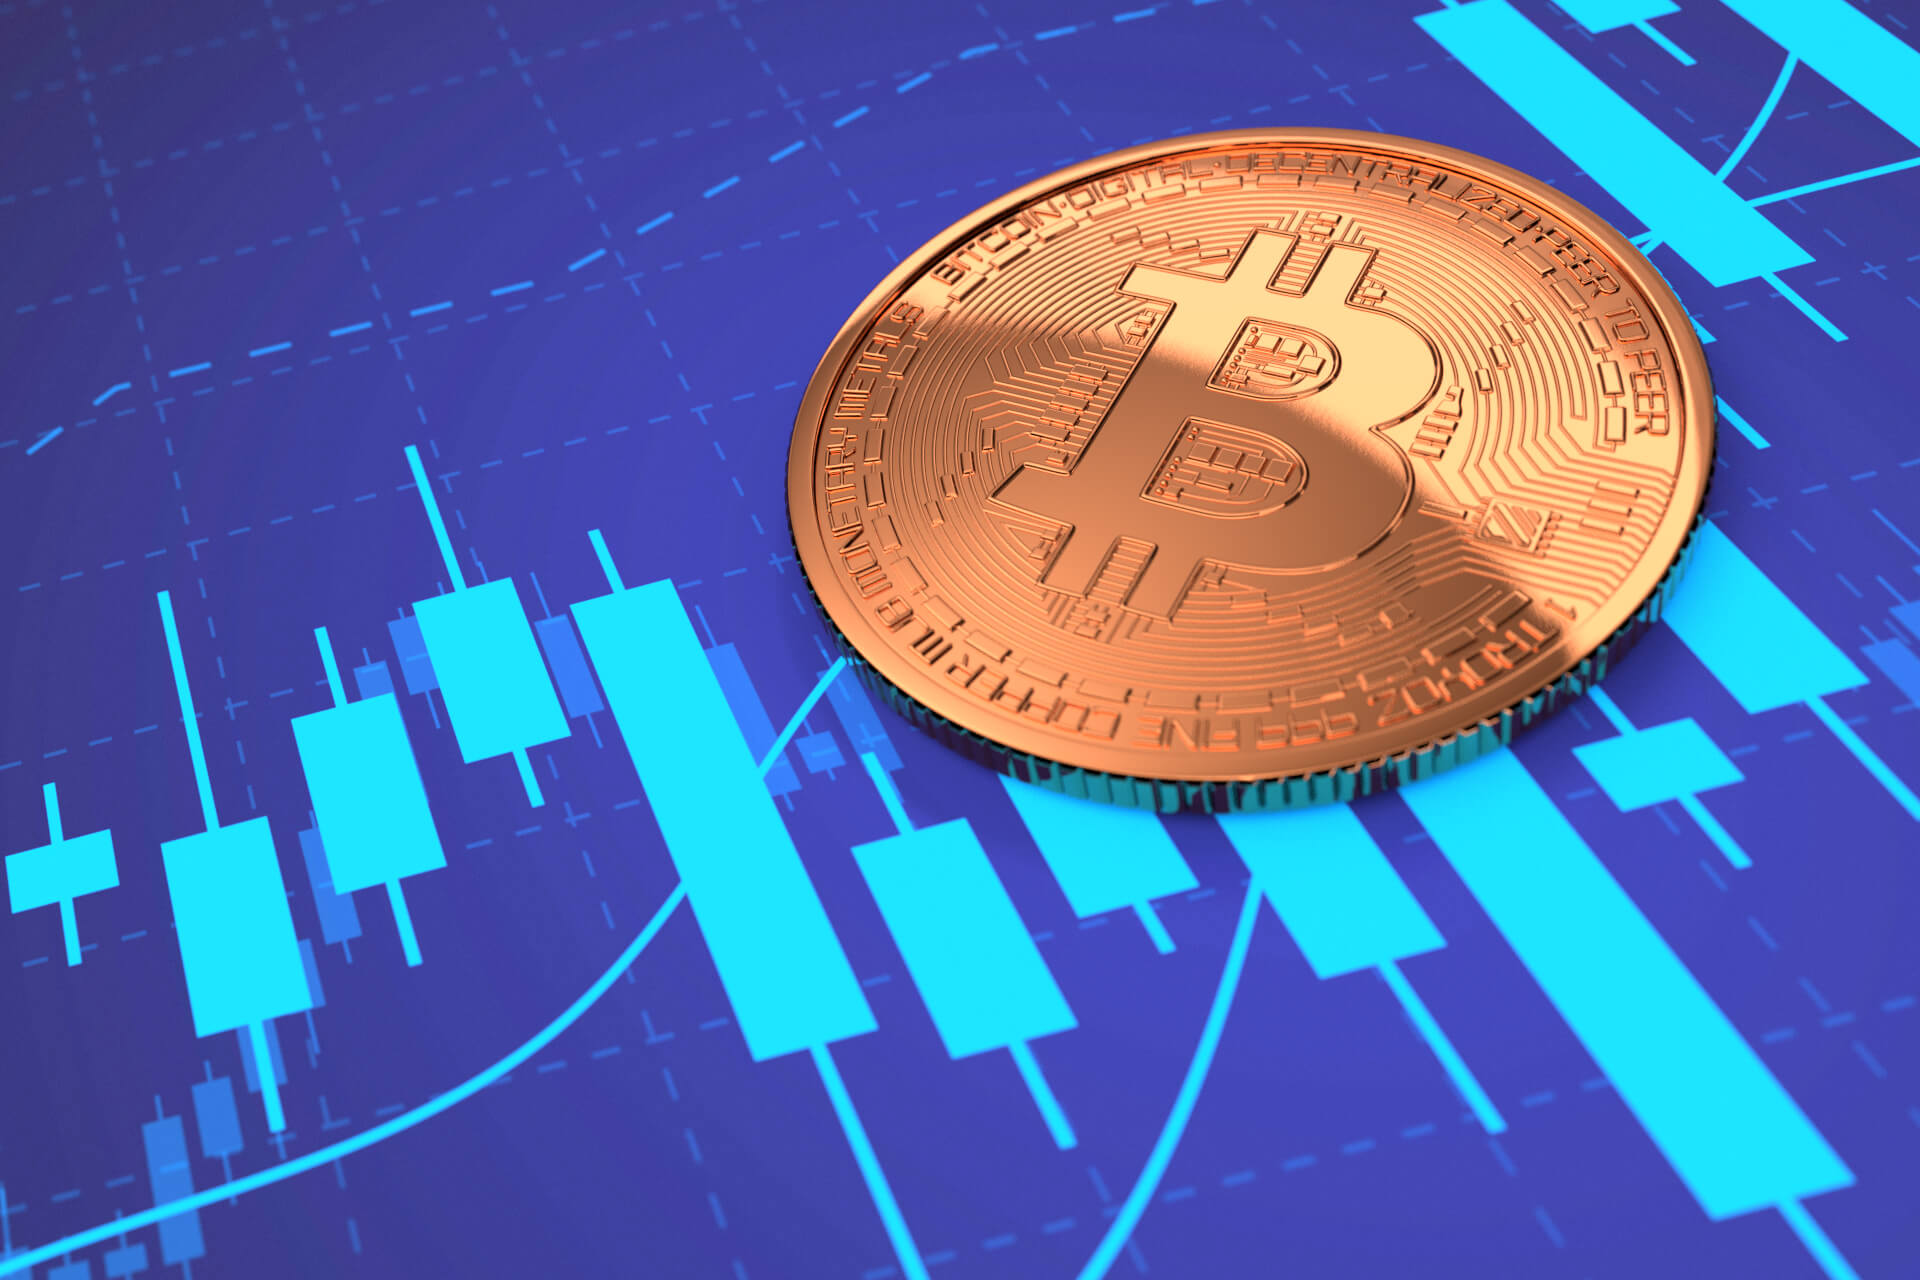 Bitcoin on blue candlestick chart free image download